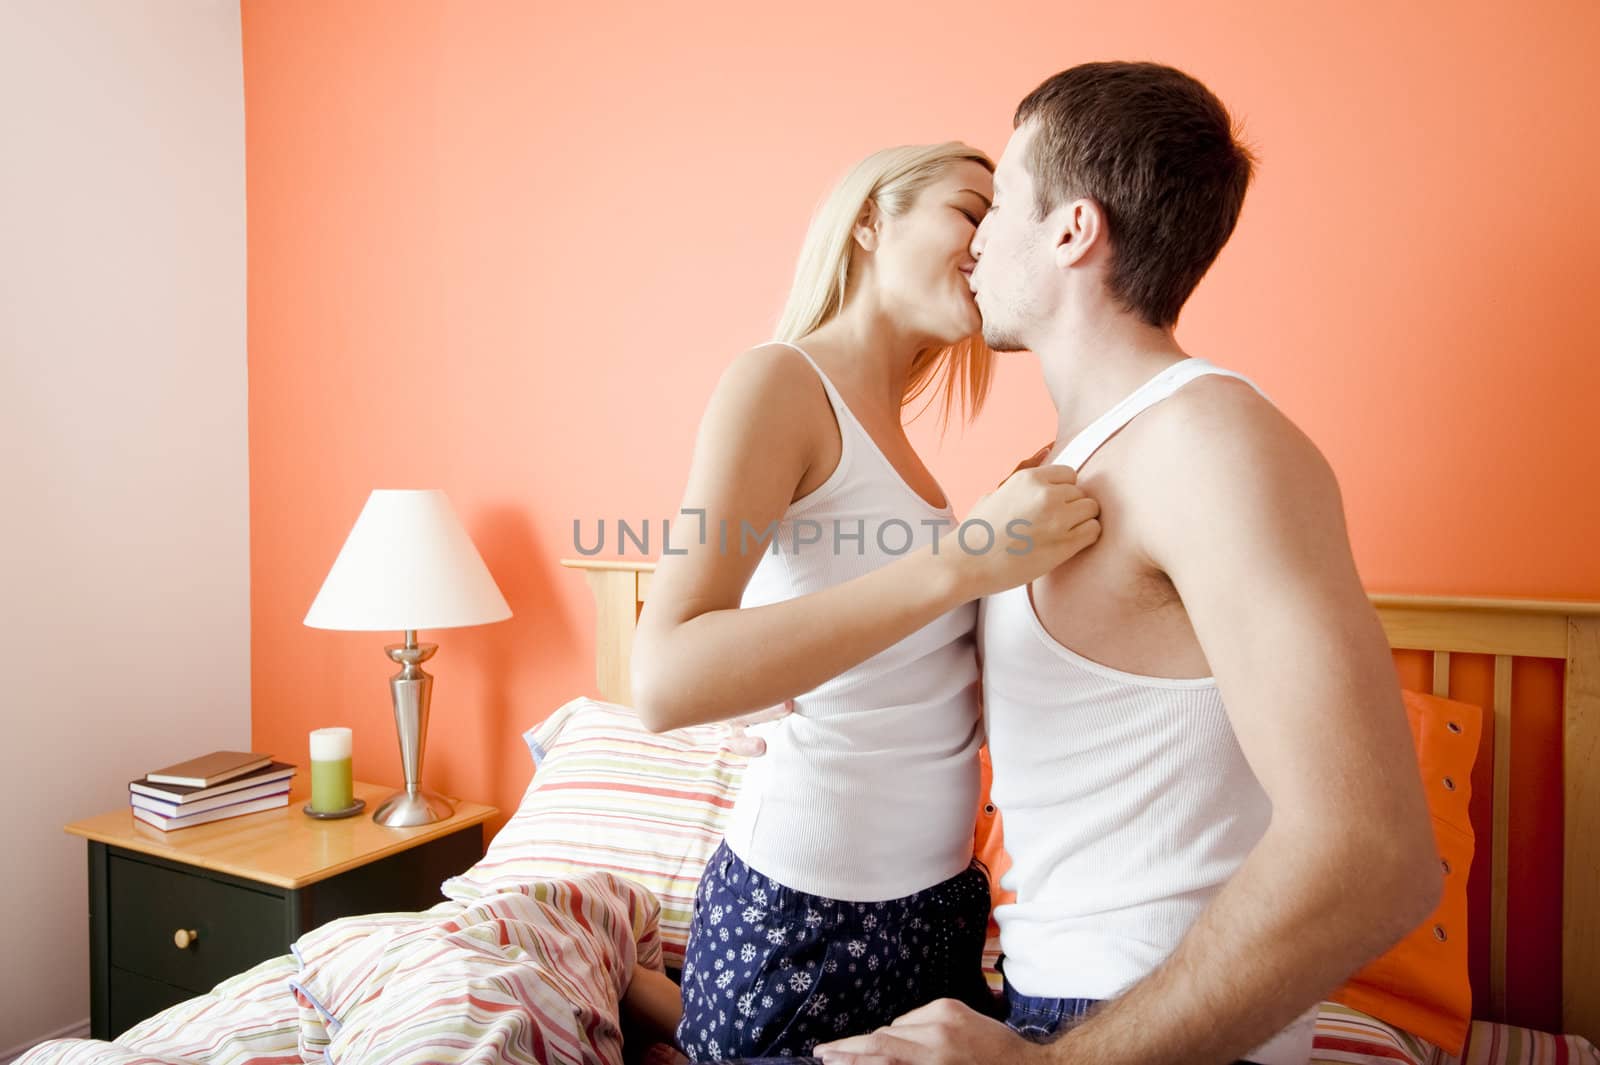 Young couple wearing white tank tops kiss passionately while kneeling on bed. Horizontal shot.